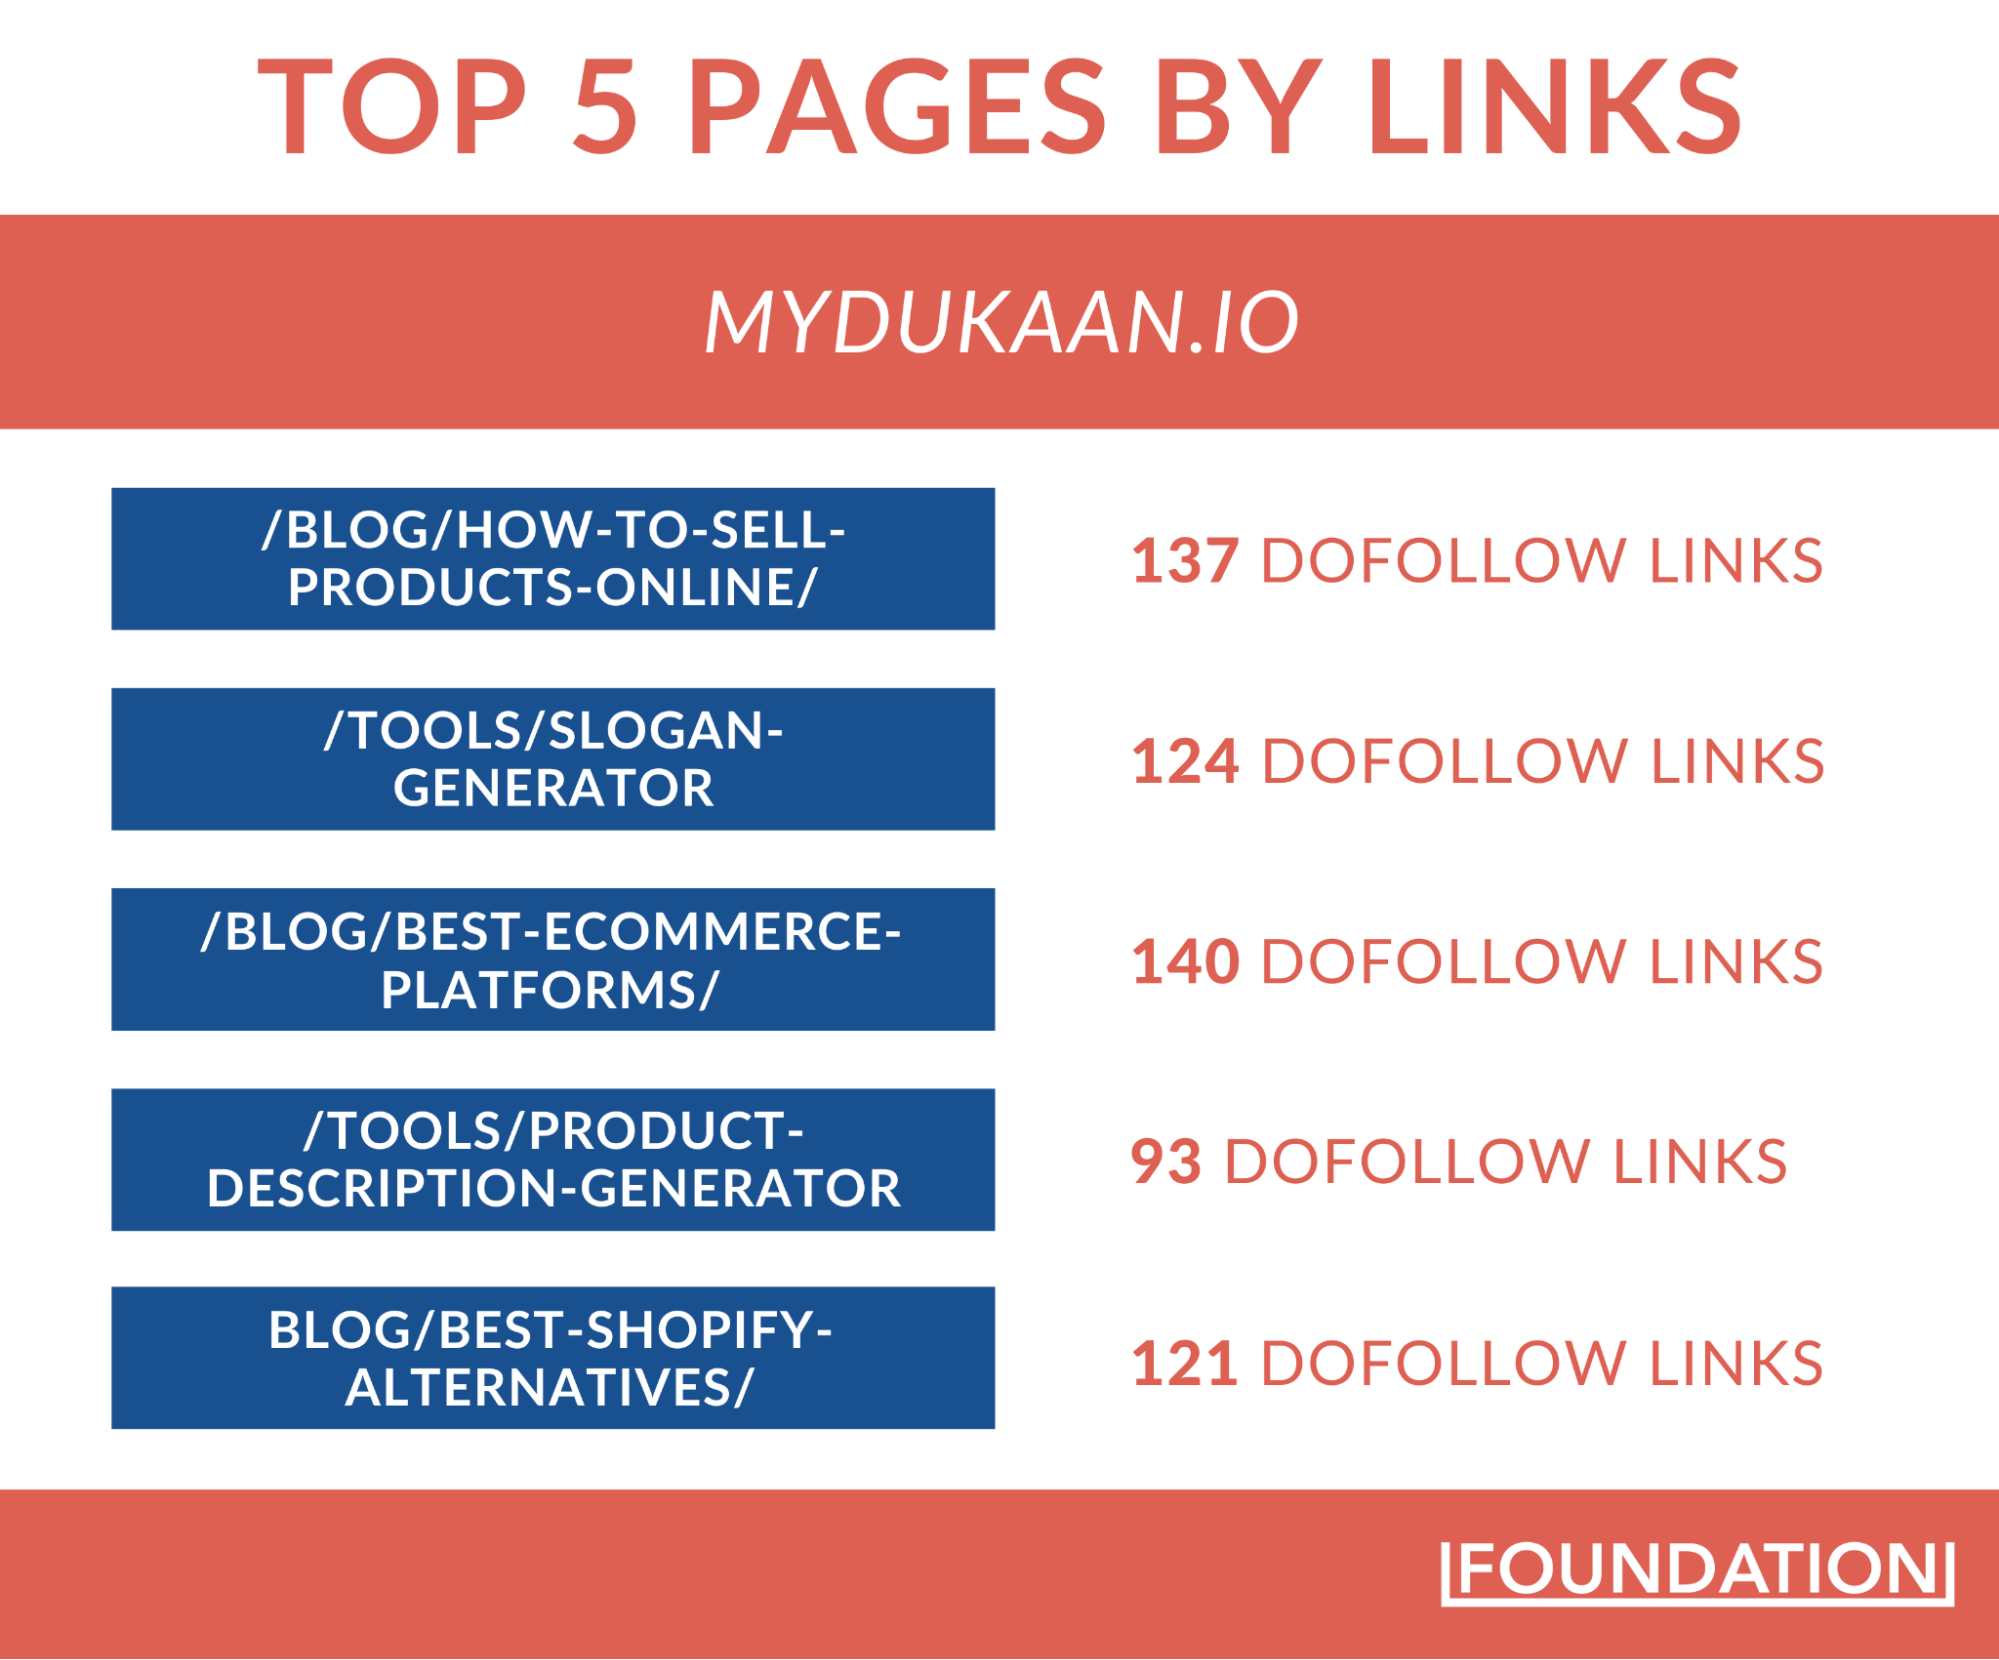 Dukaan's top pages by links